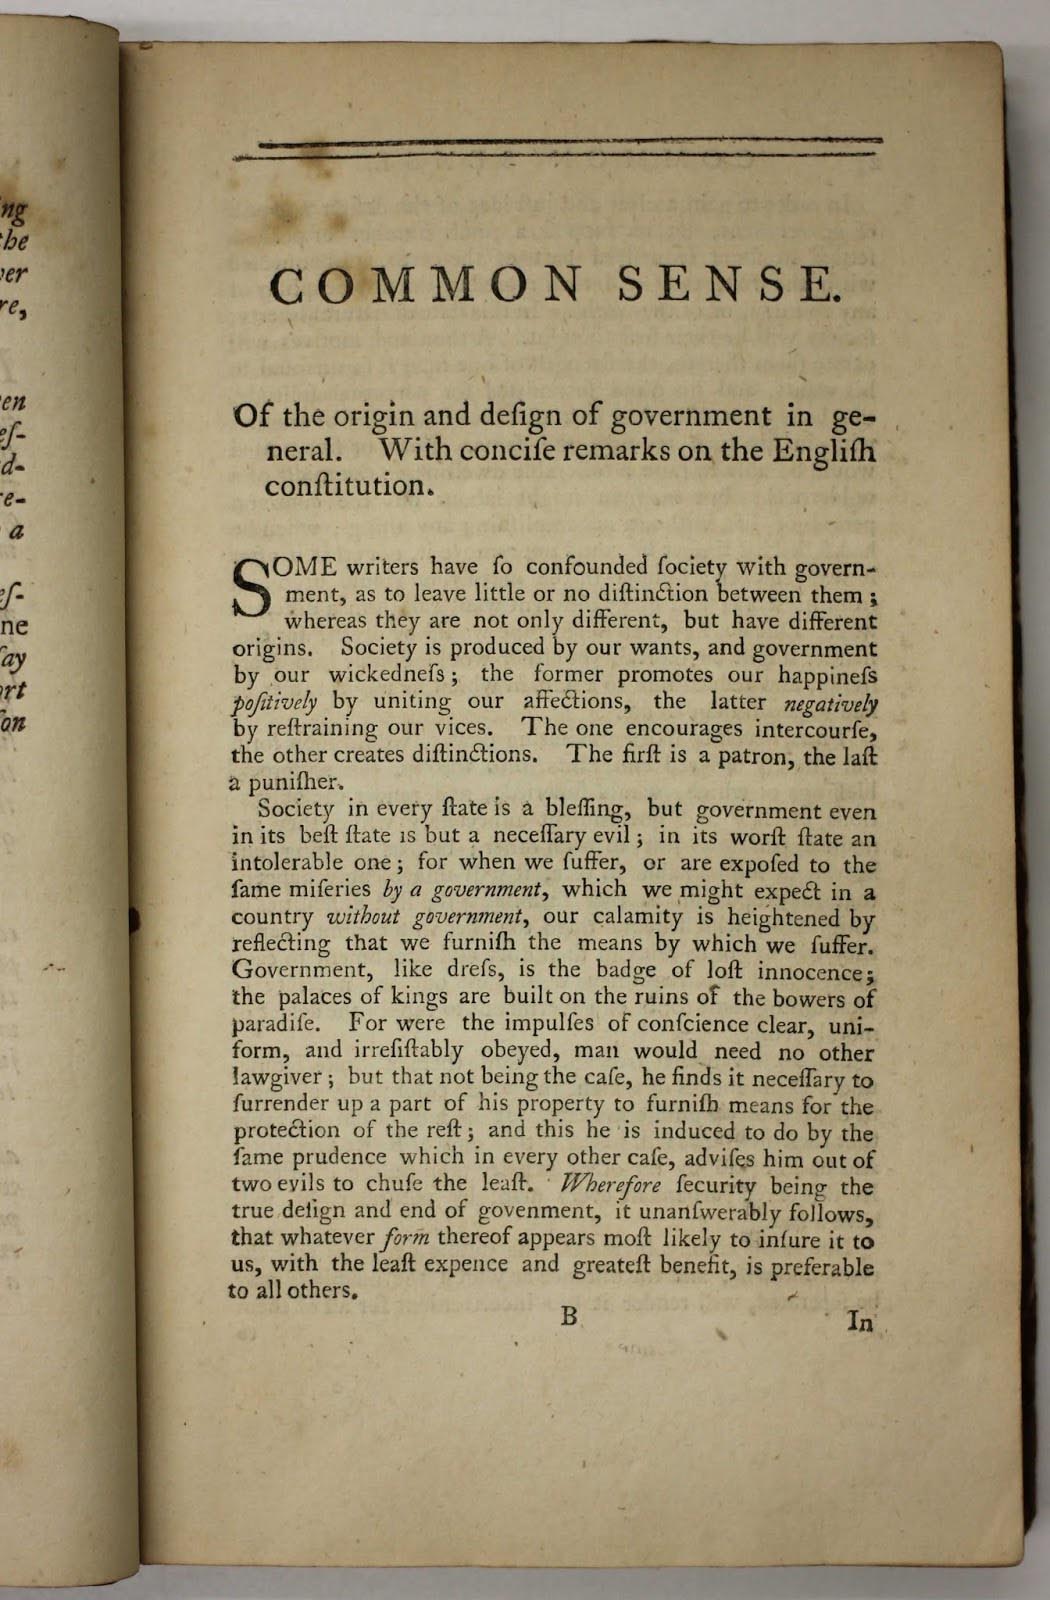 First page of text from Thomas Paine's "Common Sense"